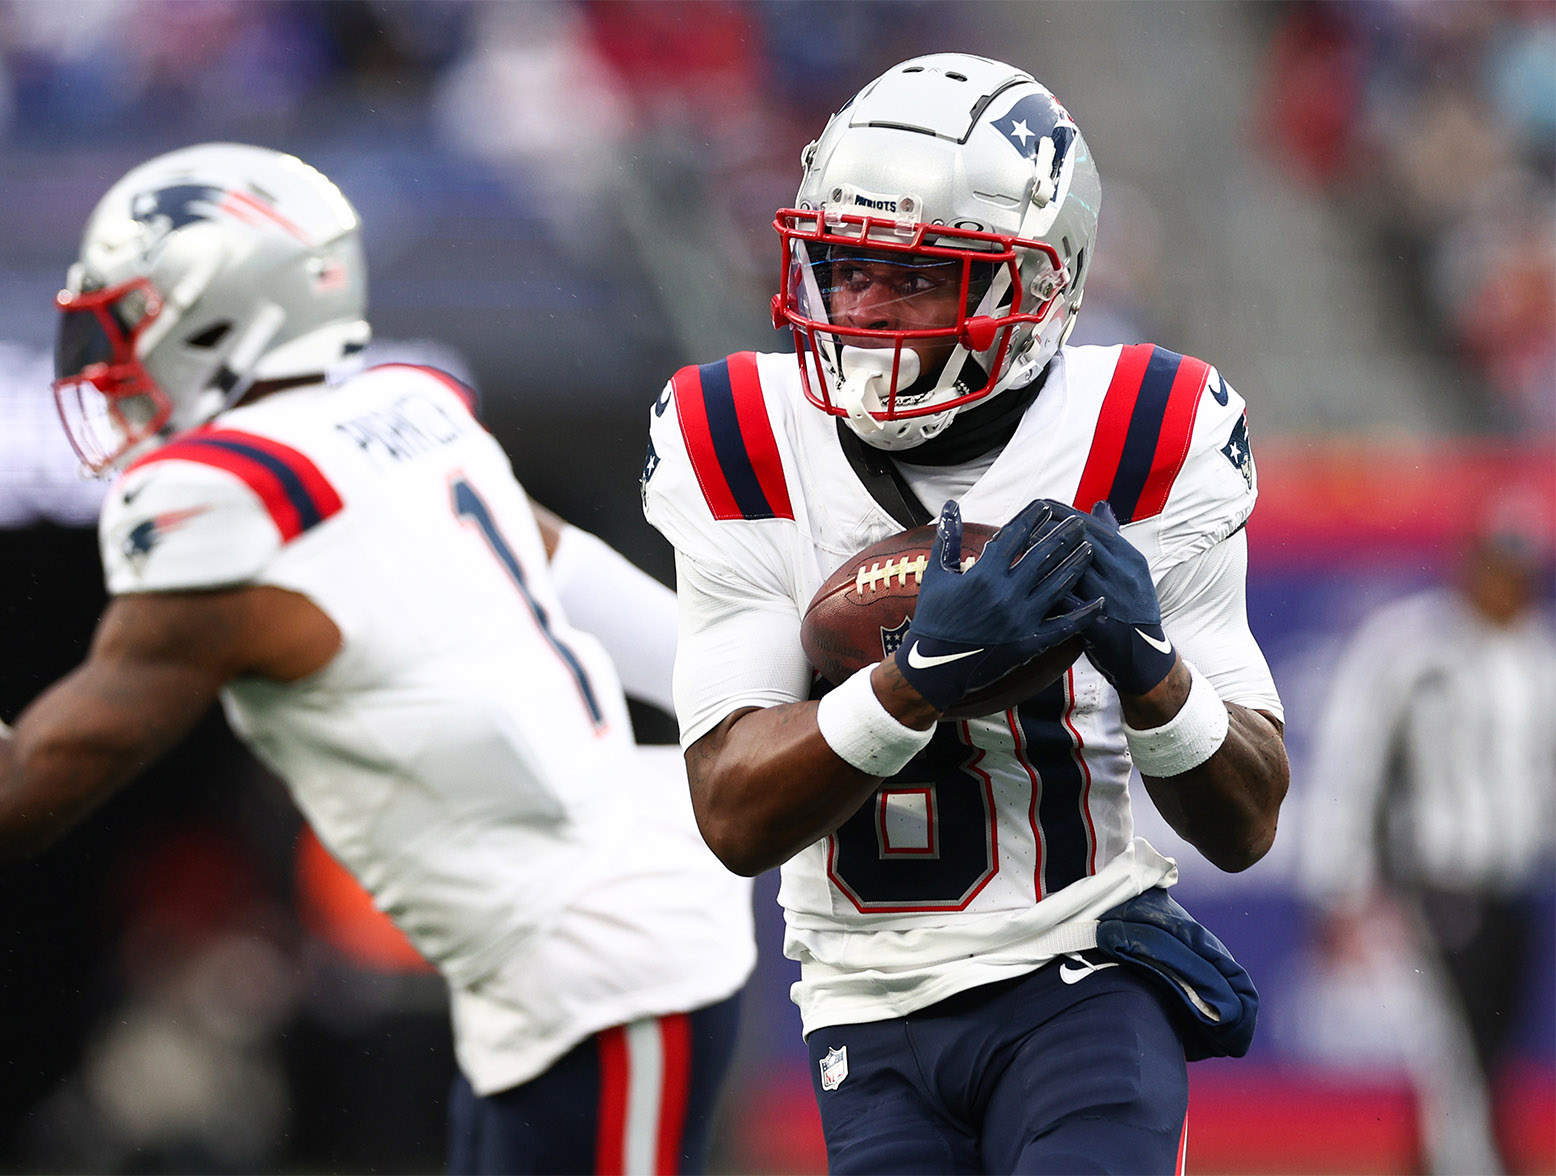 EAST RUTHERFORD, NEW JERSEY - NOVEMBER 26: Demario Douglas #81 of the New England Patriots catches a pass during the second quarter against the New York Giants at MetLife Stadium on November 26, 2023 in East Rutherford, New Jersey. (Photo by Elsa/Getty Images)